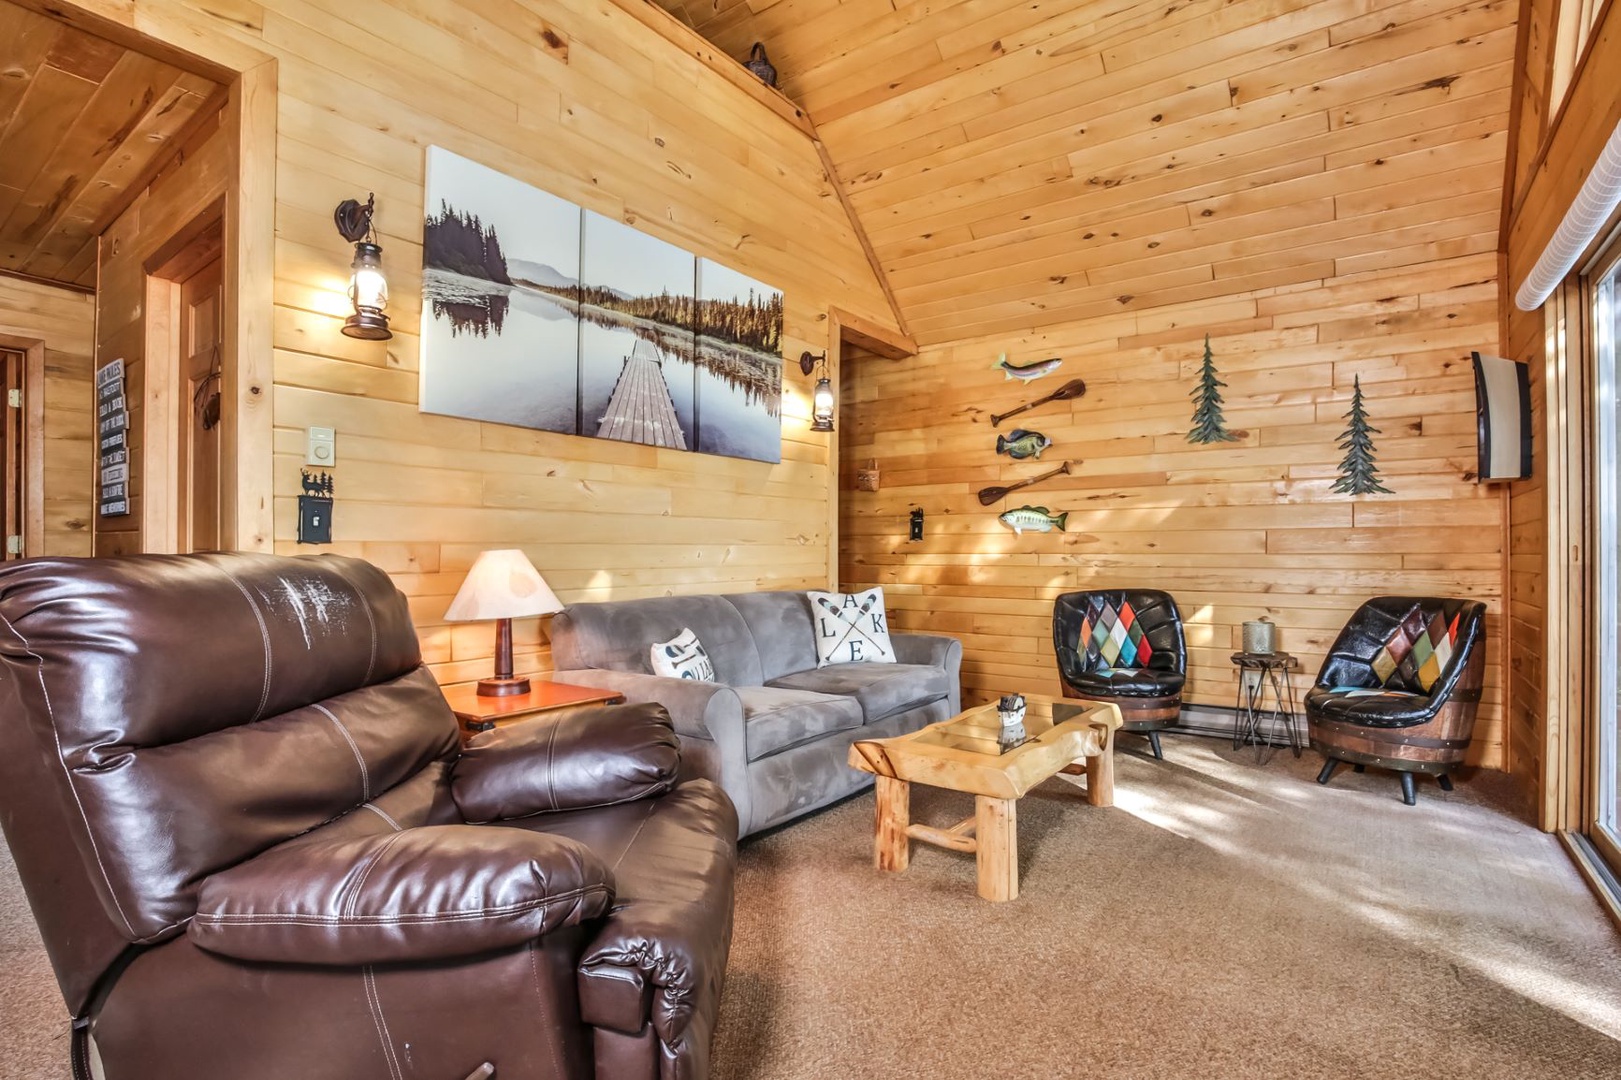 6 Acre Chalet - Hiller Vacation Homes